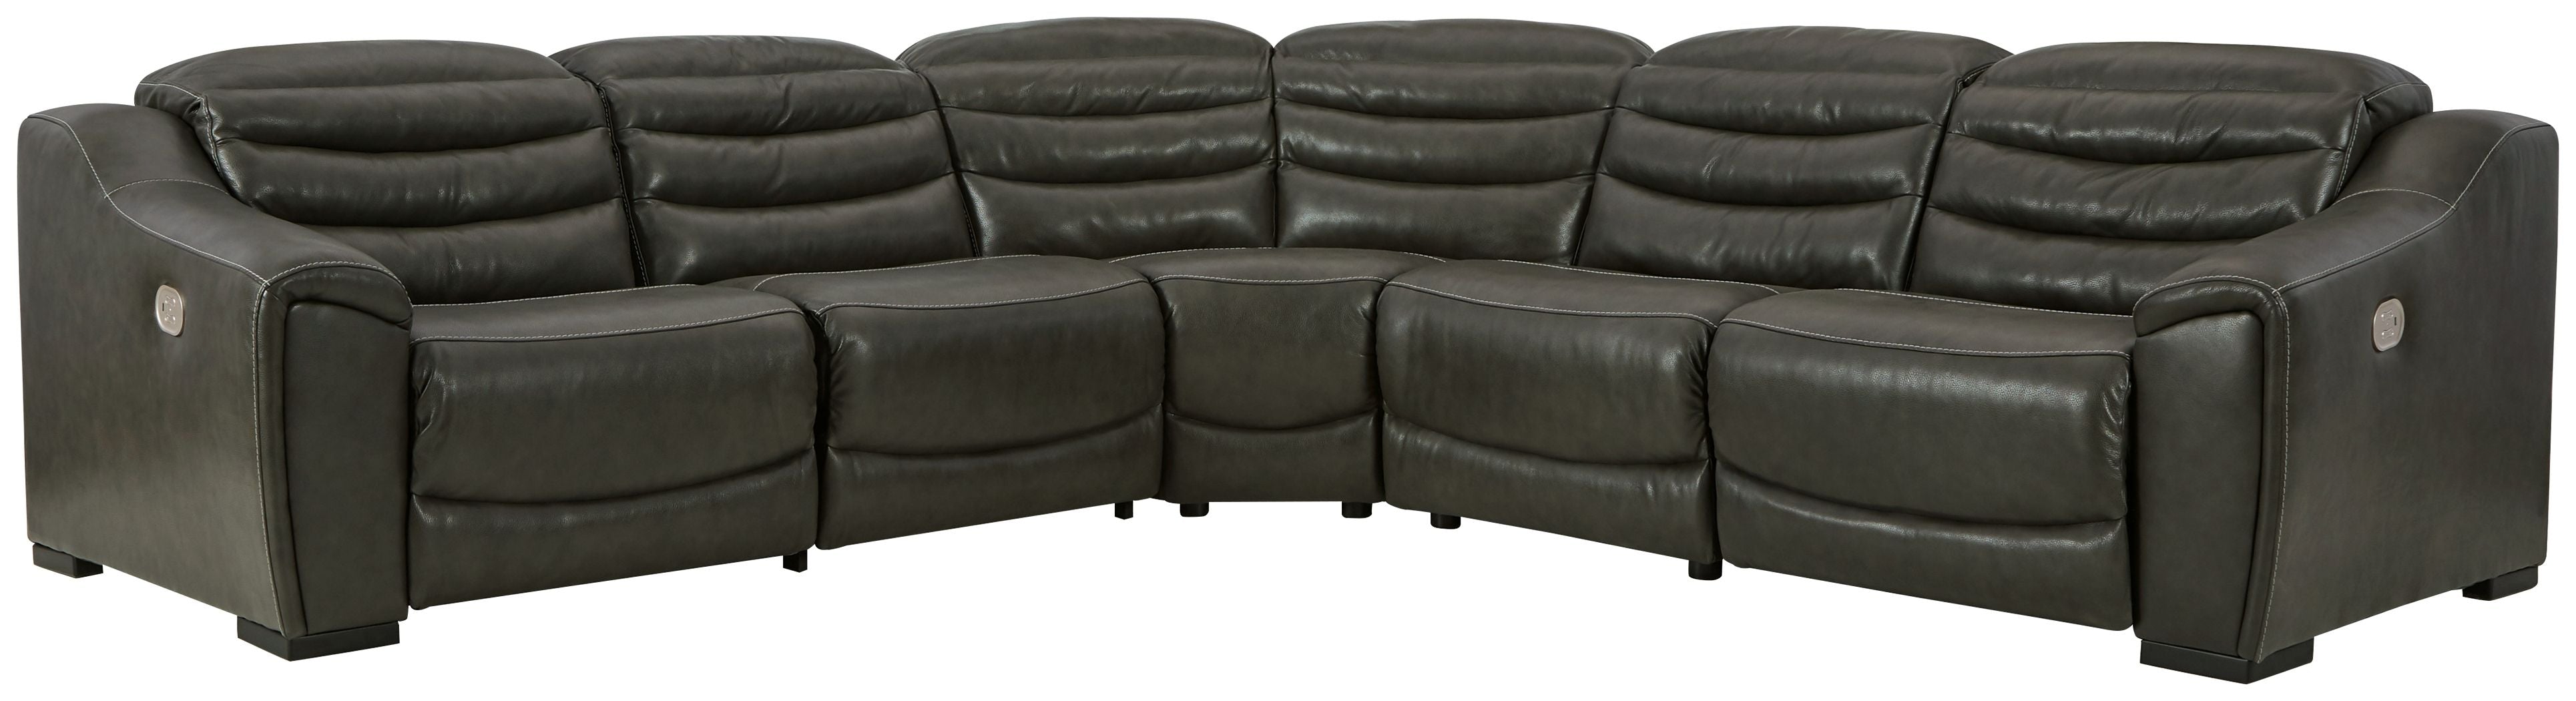 center line reclining sectional